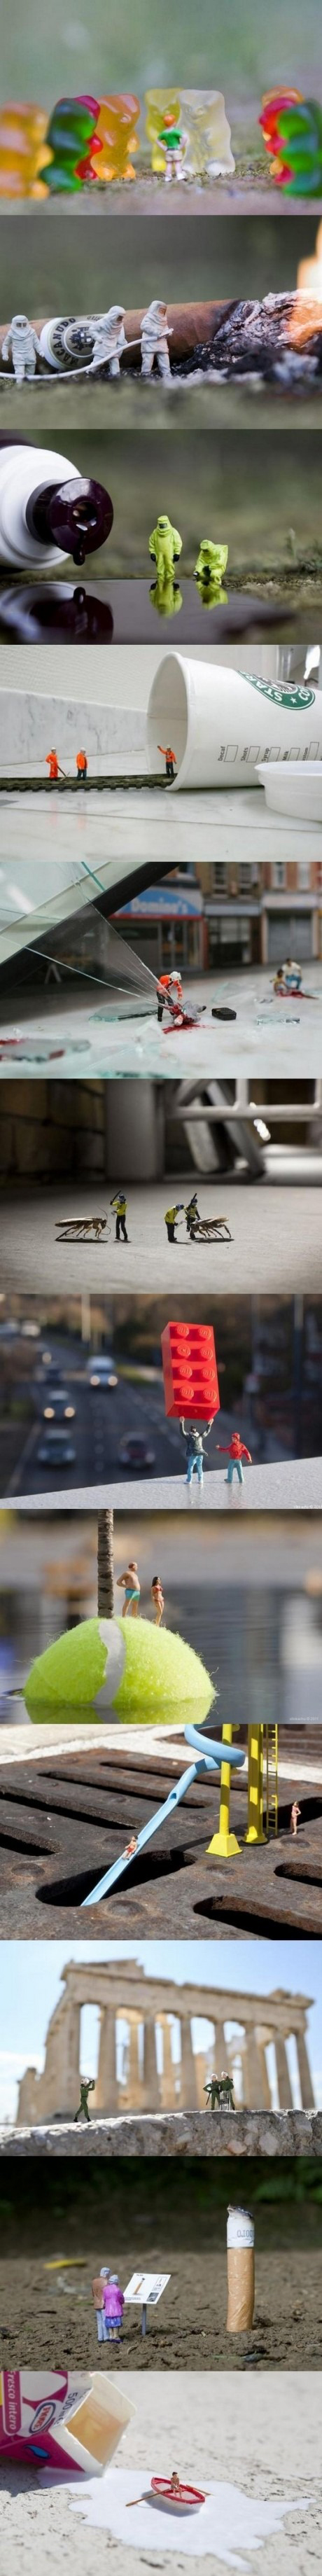 crazy pictures of a tiny world